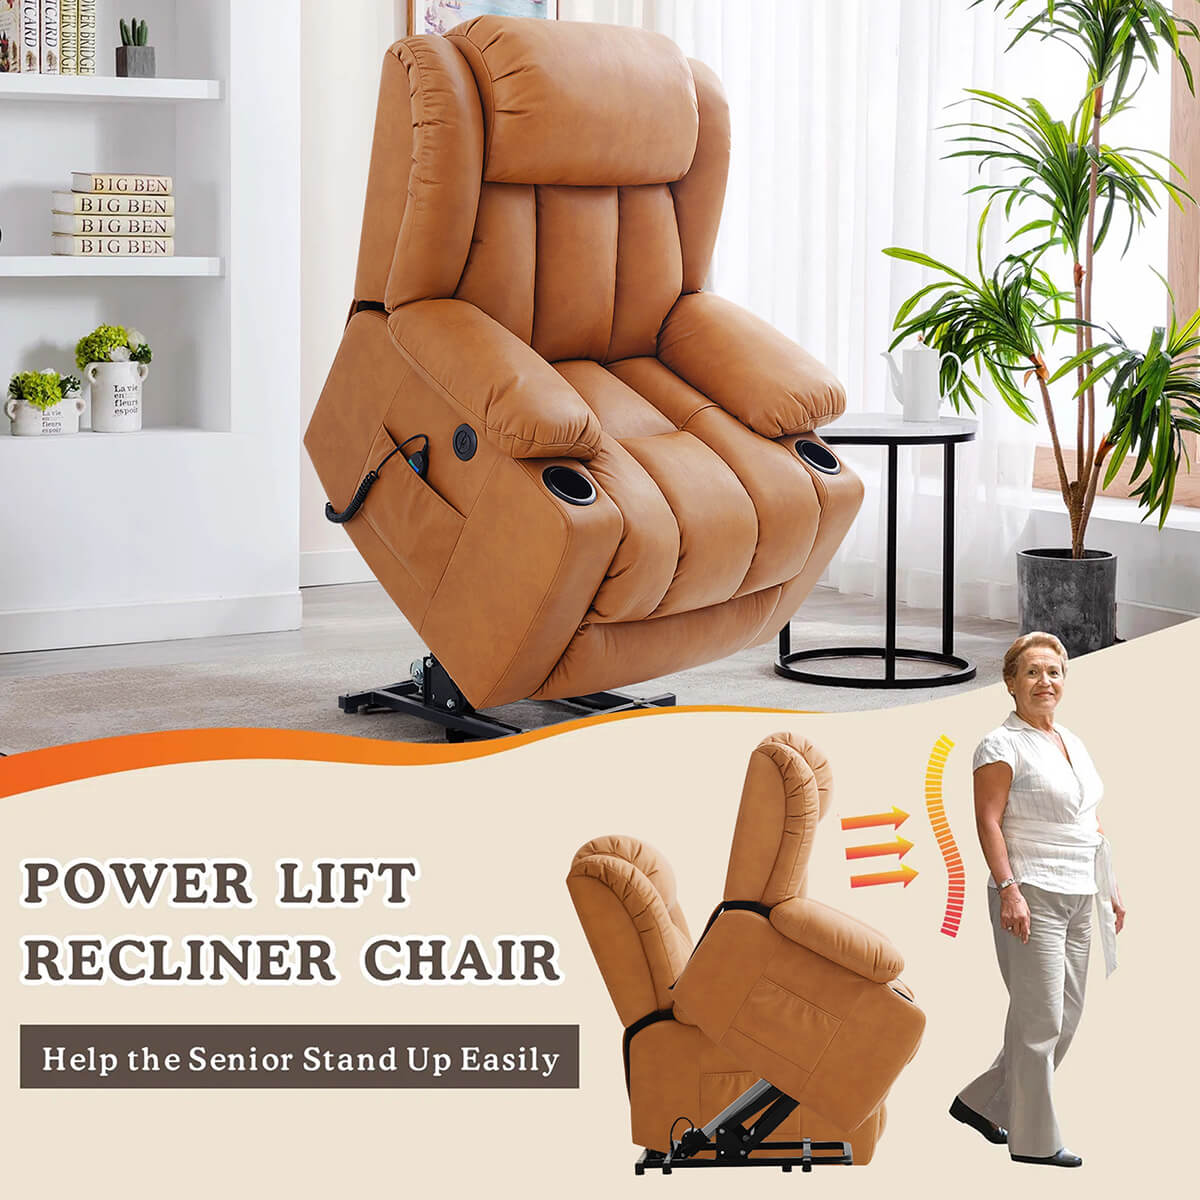 Soulout Luxury Lift Chair Recliners With Massage and Heating, Orange